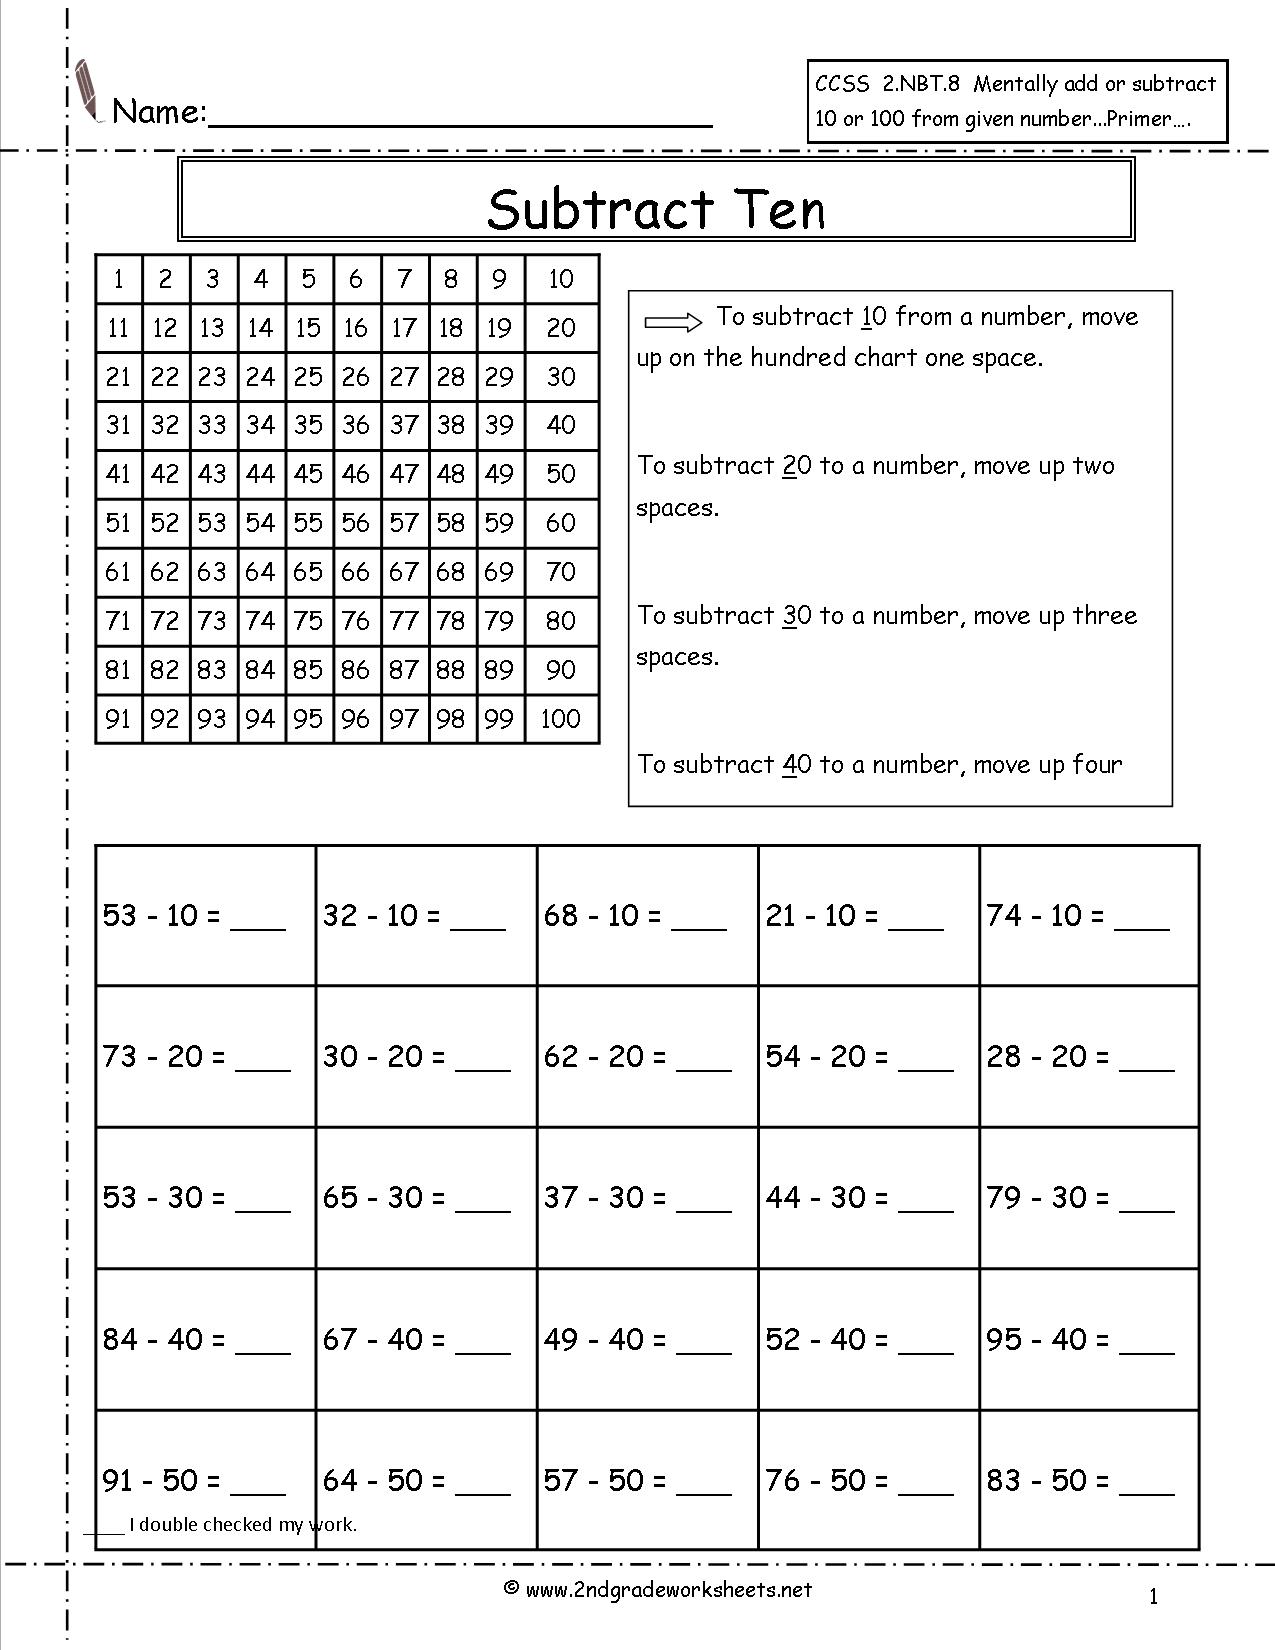 Subtracting On a Hundreds Chart Worksheets Image